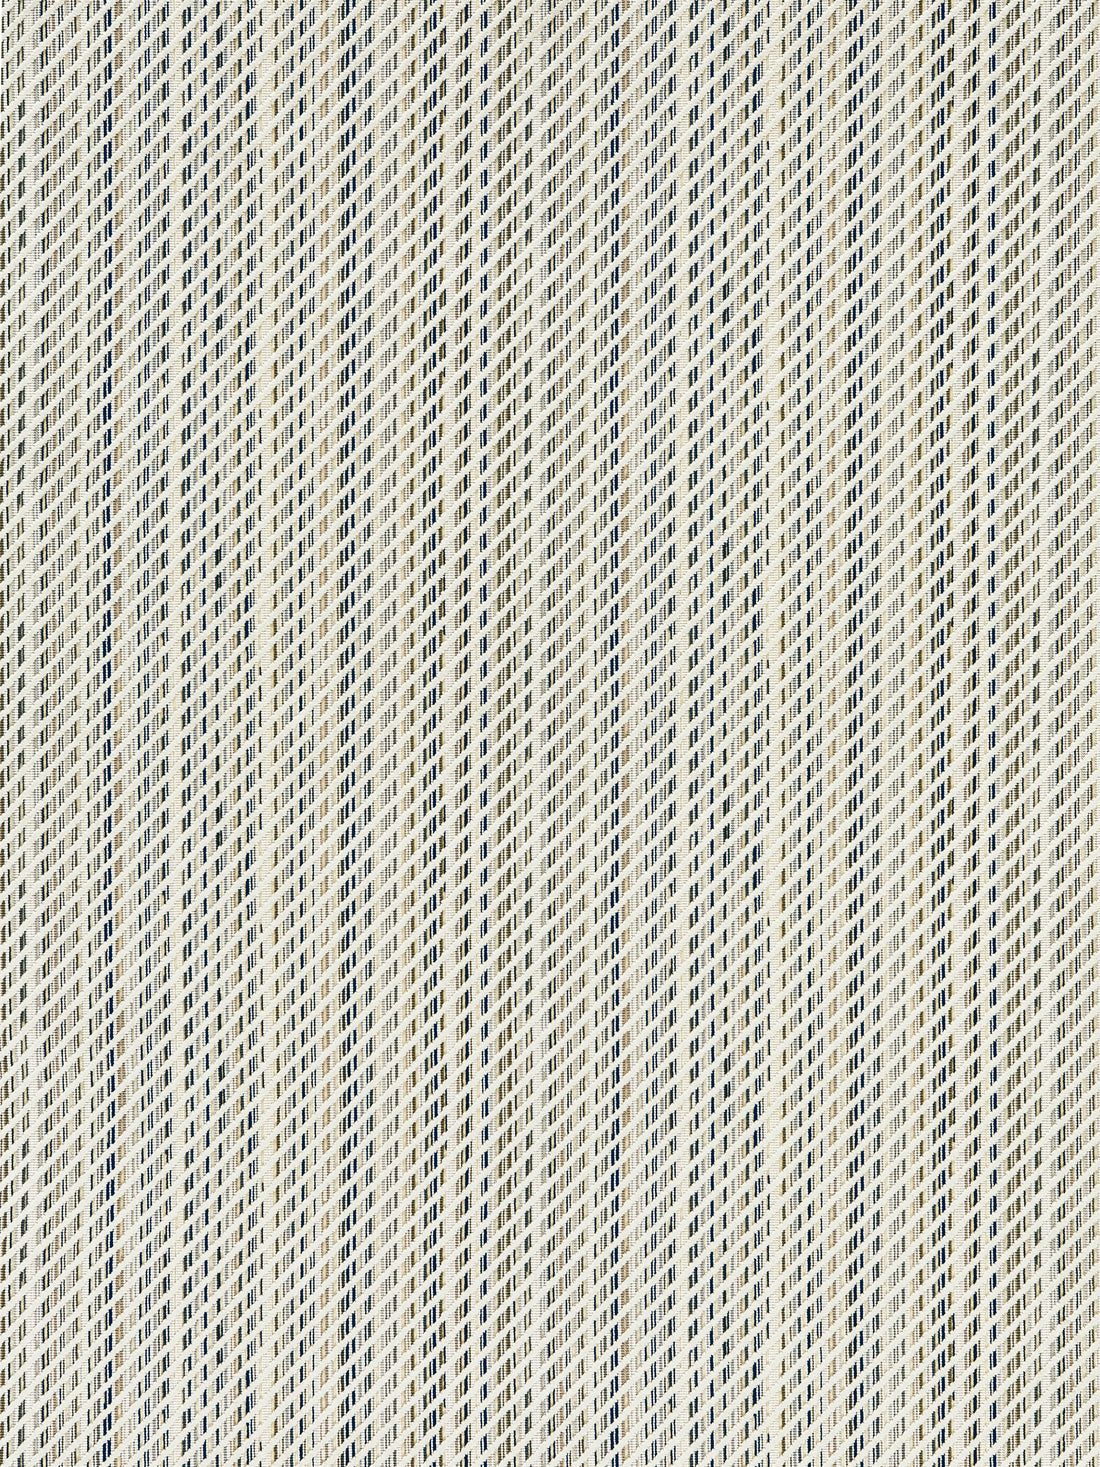 Prisma Velvet fabric in boardwalk color - pattern number SC 000327238 - by Scalamandre in the Scalamandre Fabrics Book 1 collection